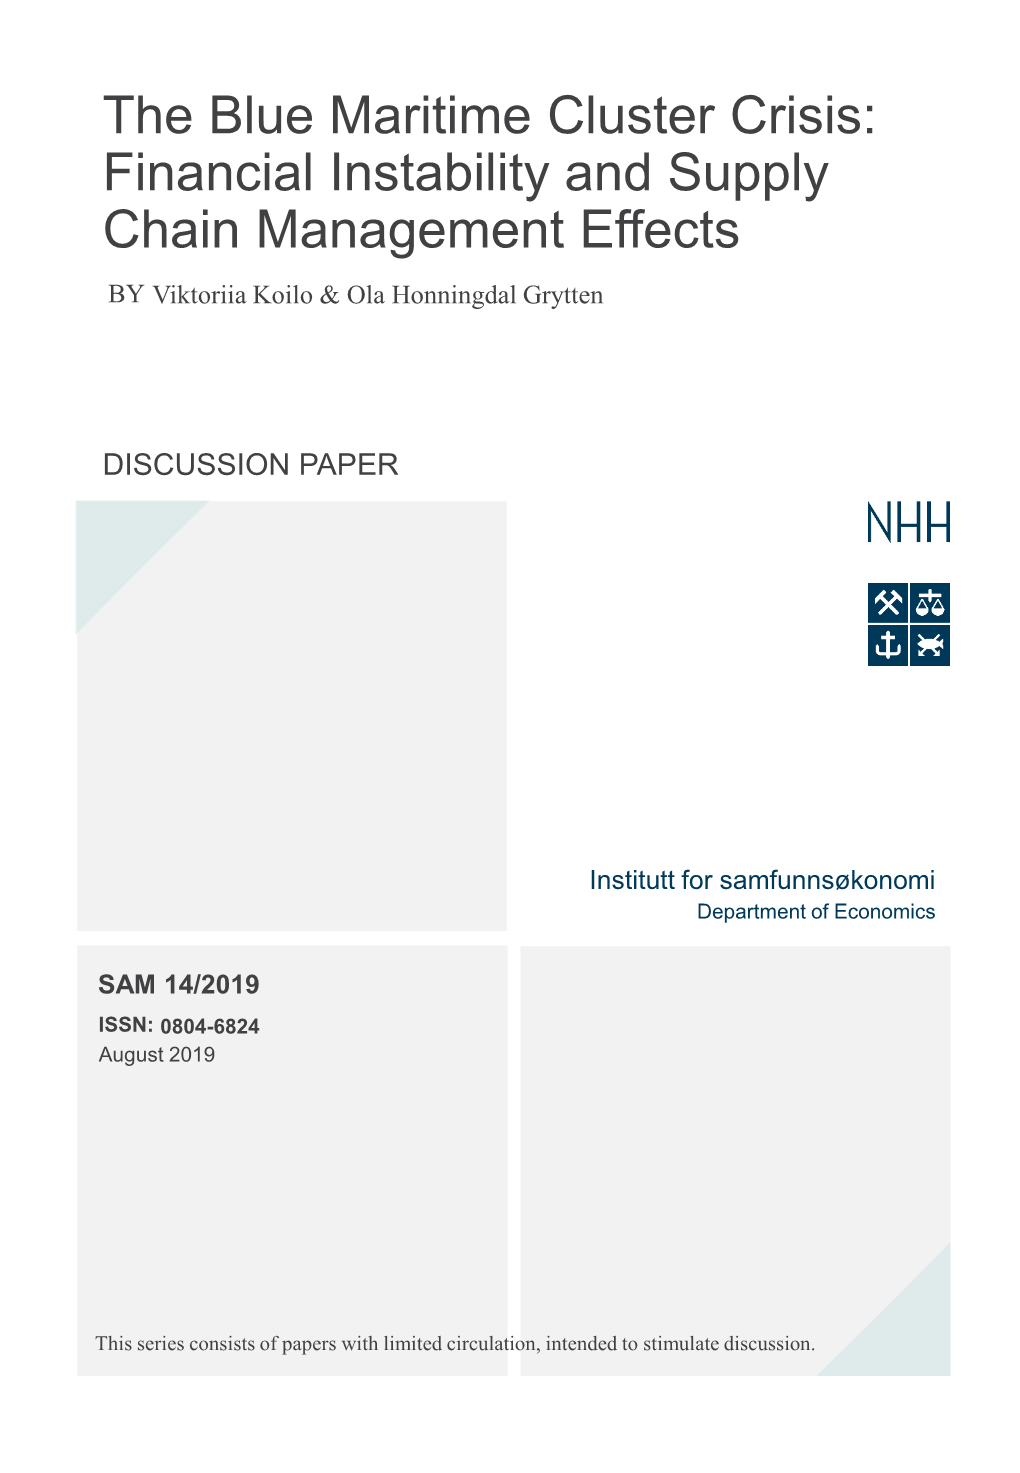 The Blue Maritime Cluster Crisis: Financial Instability and Supply Chain Management Effects by Viktoriia Koilo & Ola Honningdal Grytten